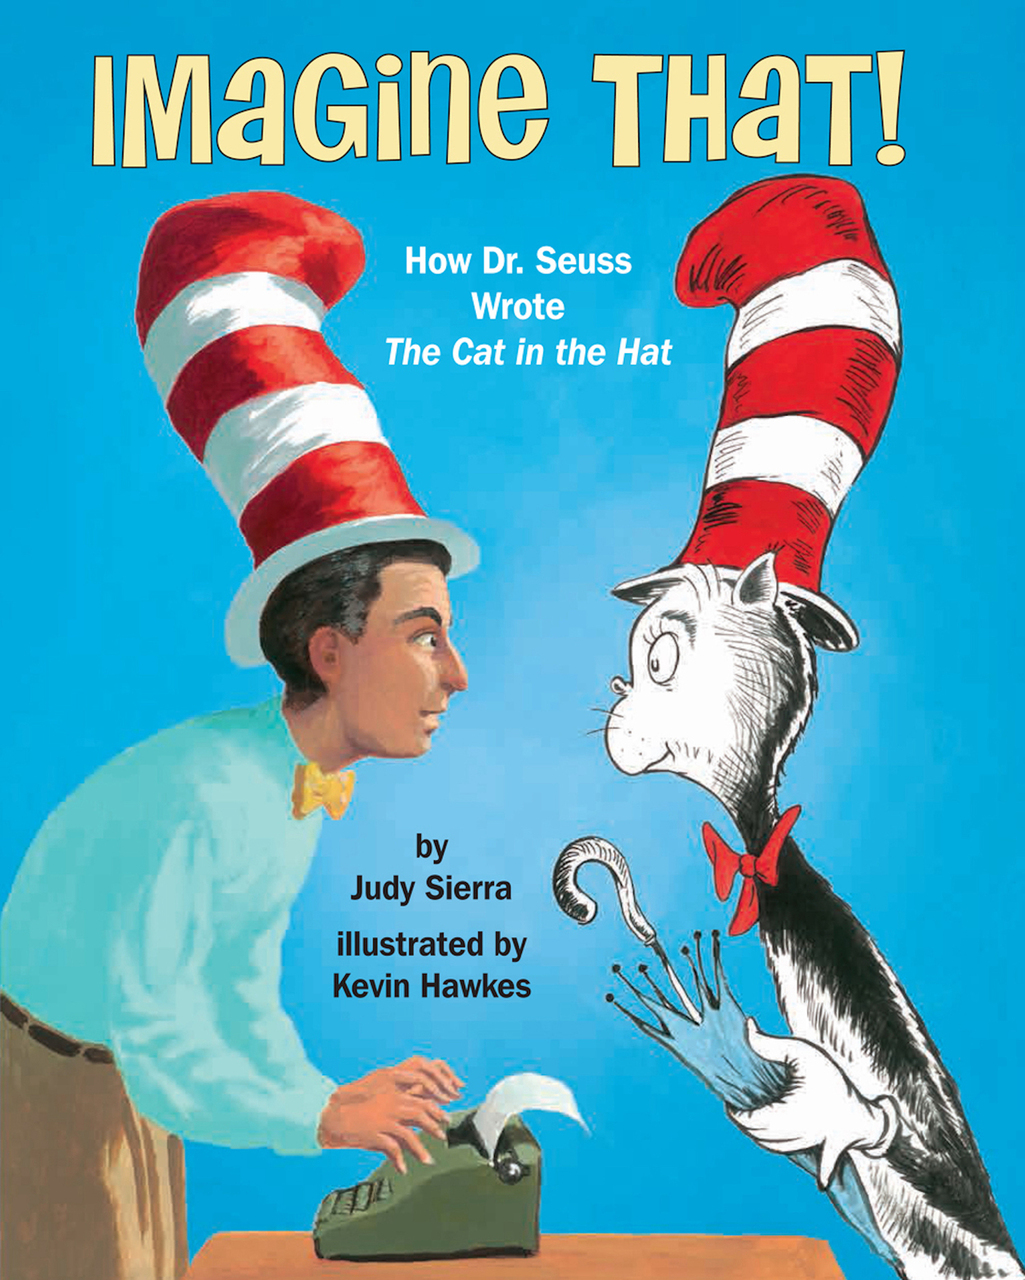 Imagine That! How Dr. Seuss Wrote 'The Cat in the Hat'